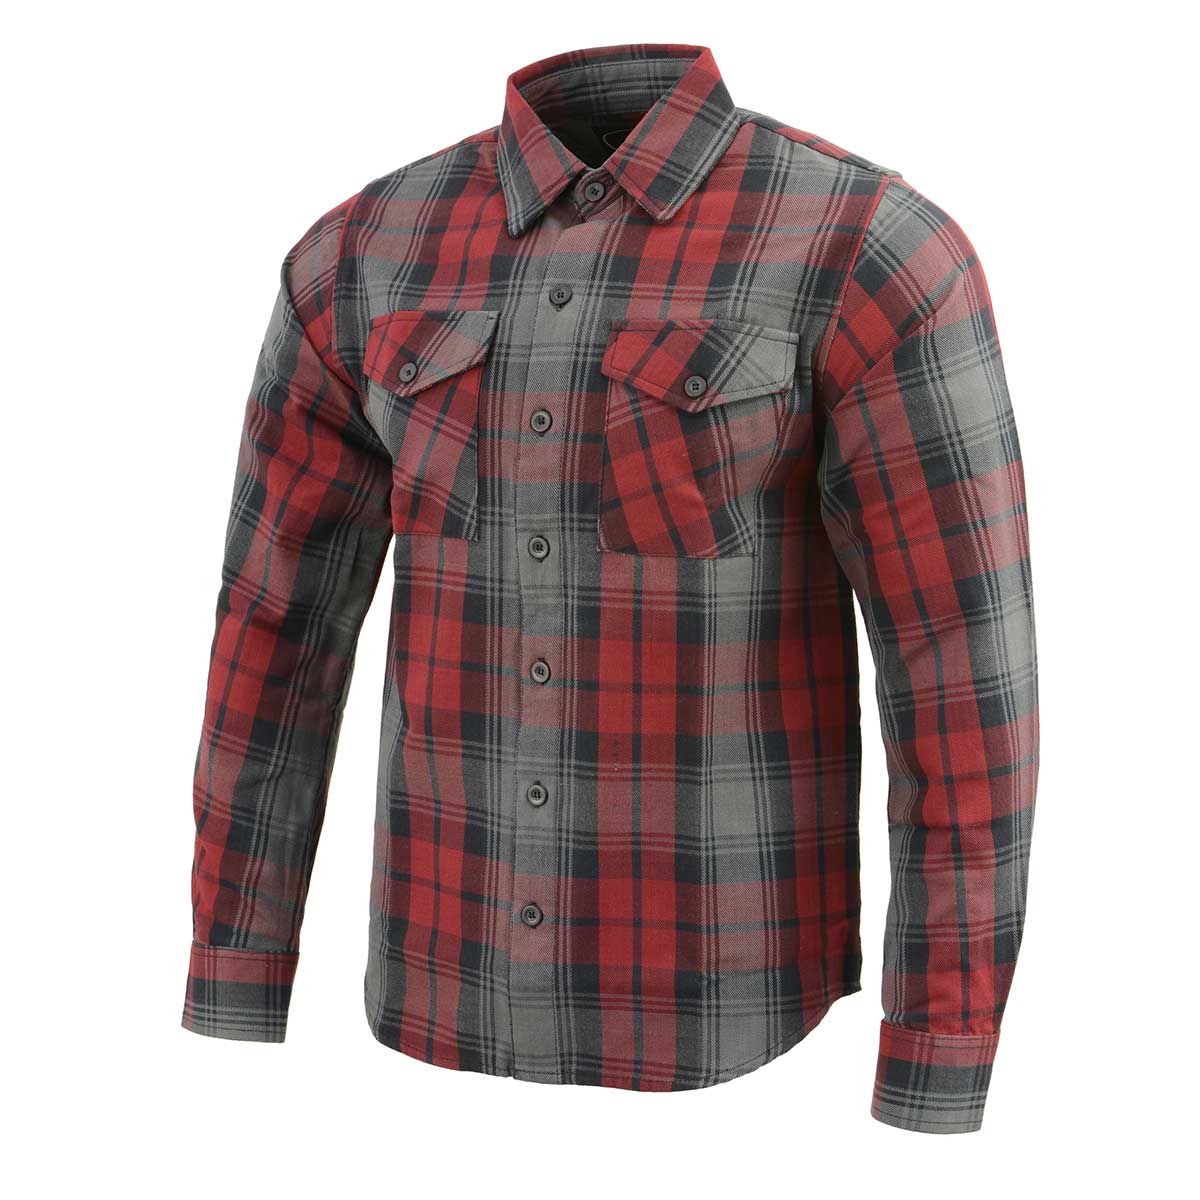 Milwaukee Leather MNG11652 Men's Black Grey and Red Long Sleeve Cotton Flannel Shirt